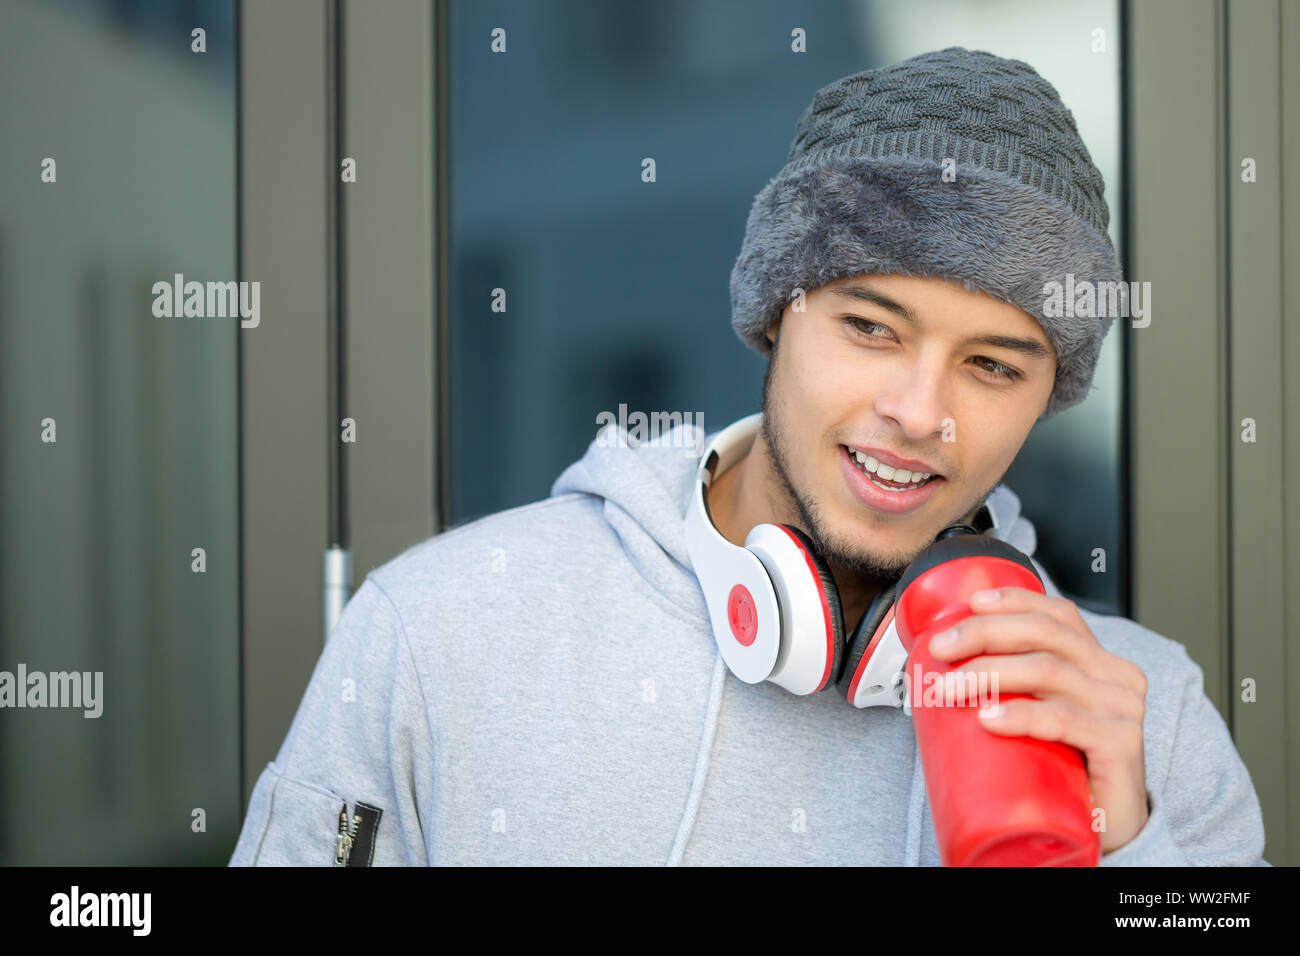 Sports training young latin man drinking runner copyspace copy space winter running fitness outdoor Stock Photo